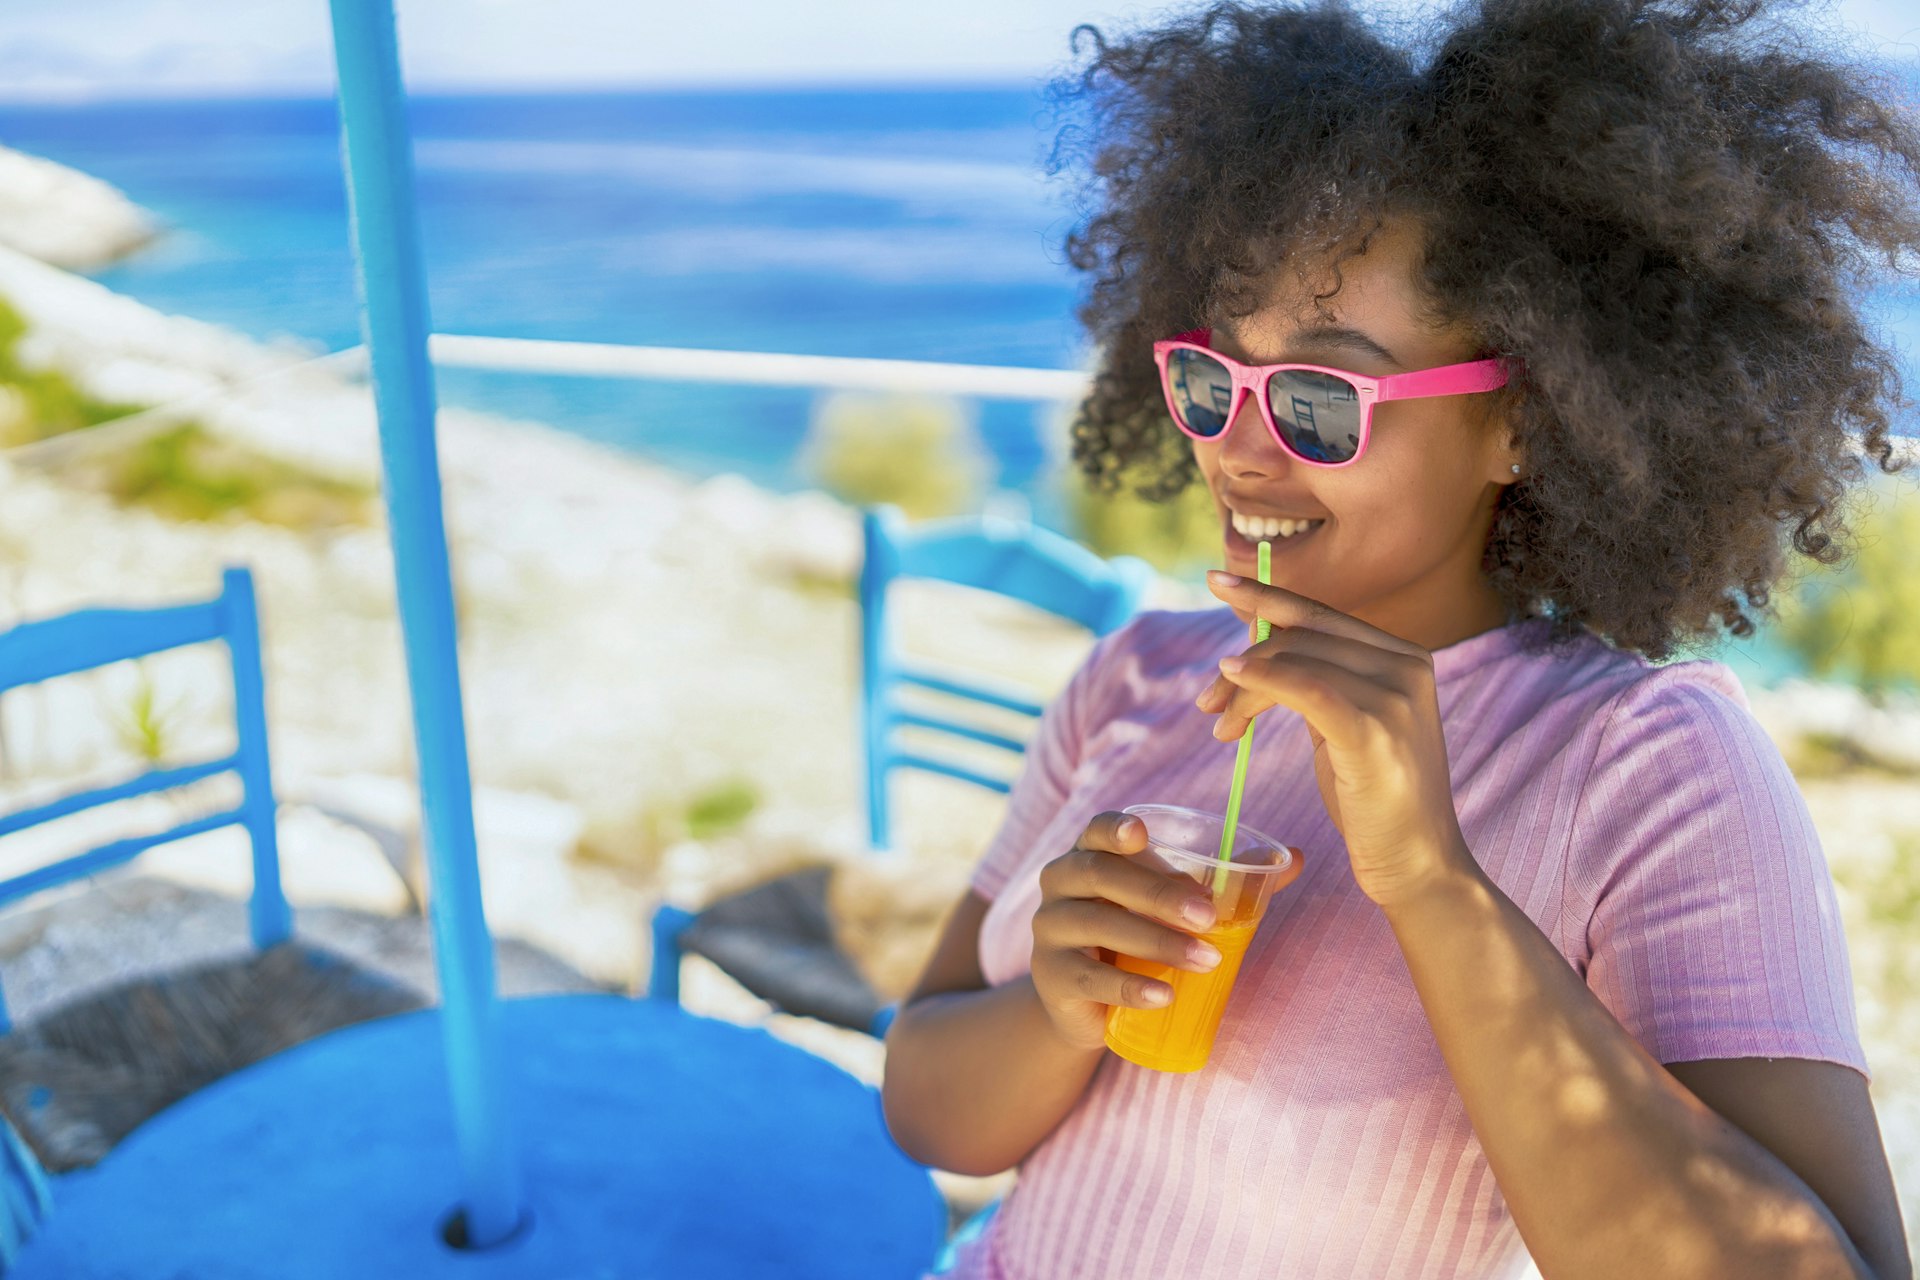 A woman sitting by the sea smiling and drinking a glass of juice